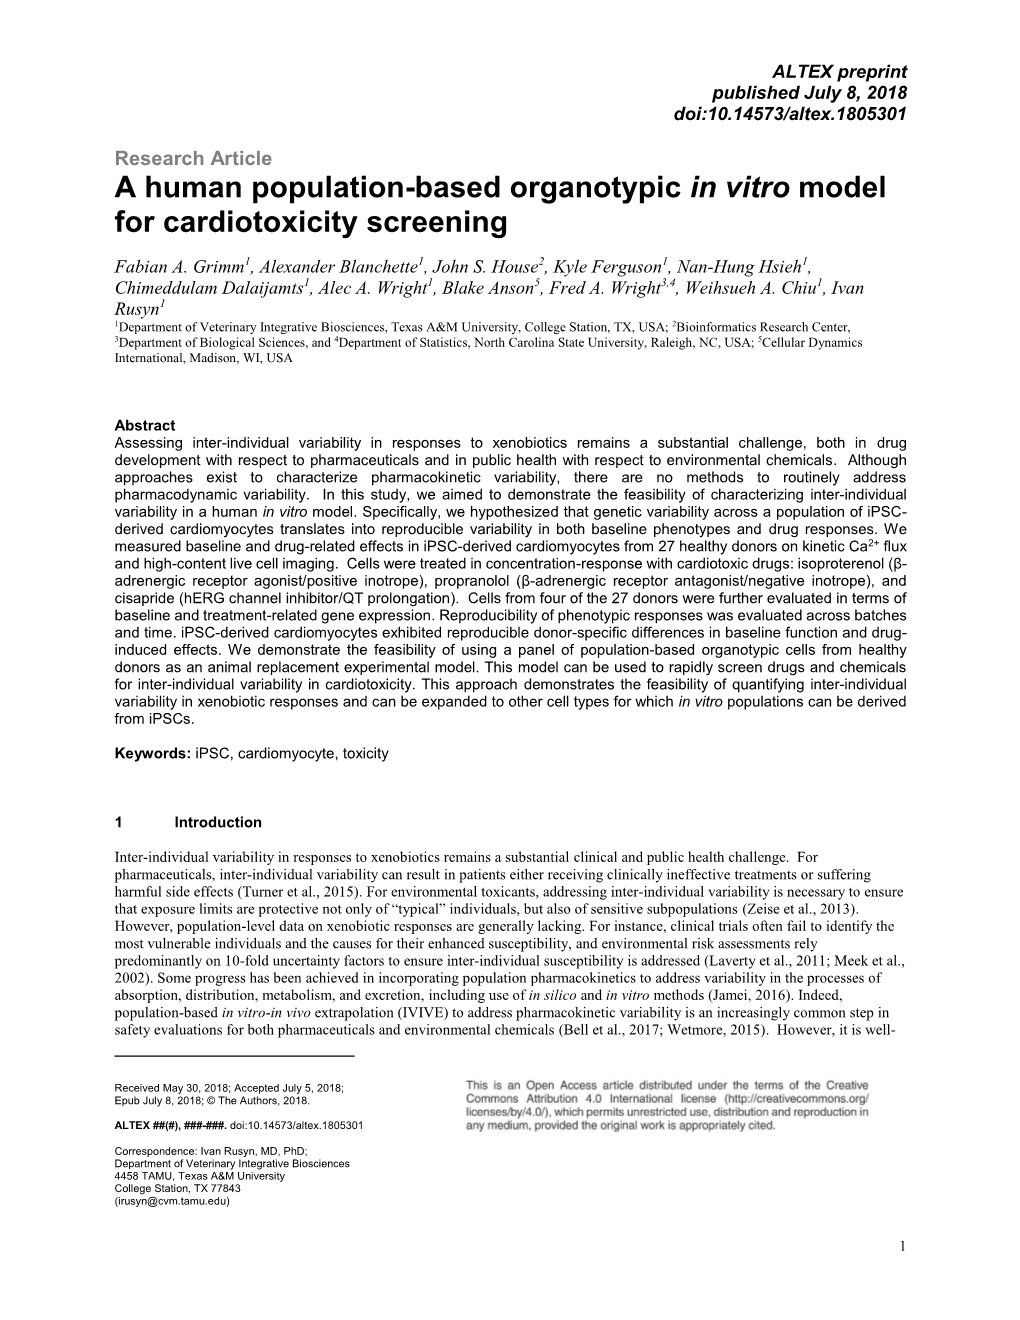 A Human Population-Based Organotypic in Vitro Model for Cardiotoxicity Screening1